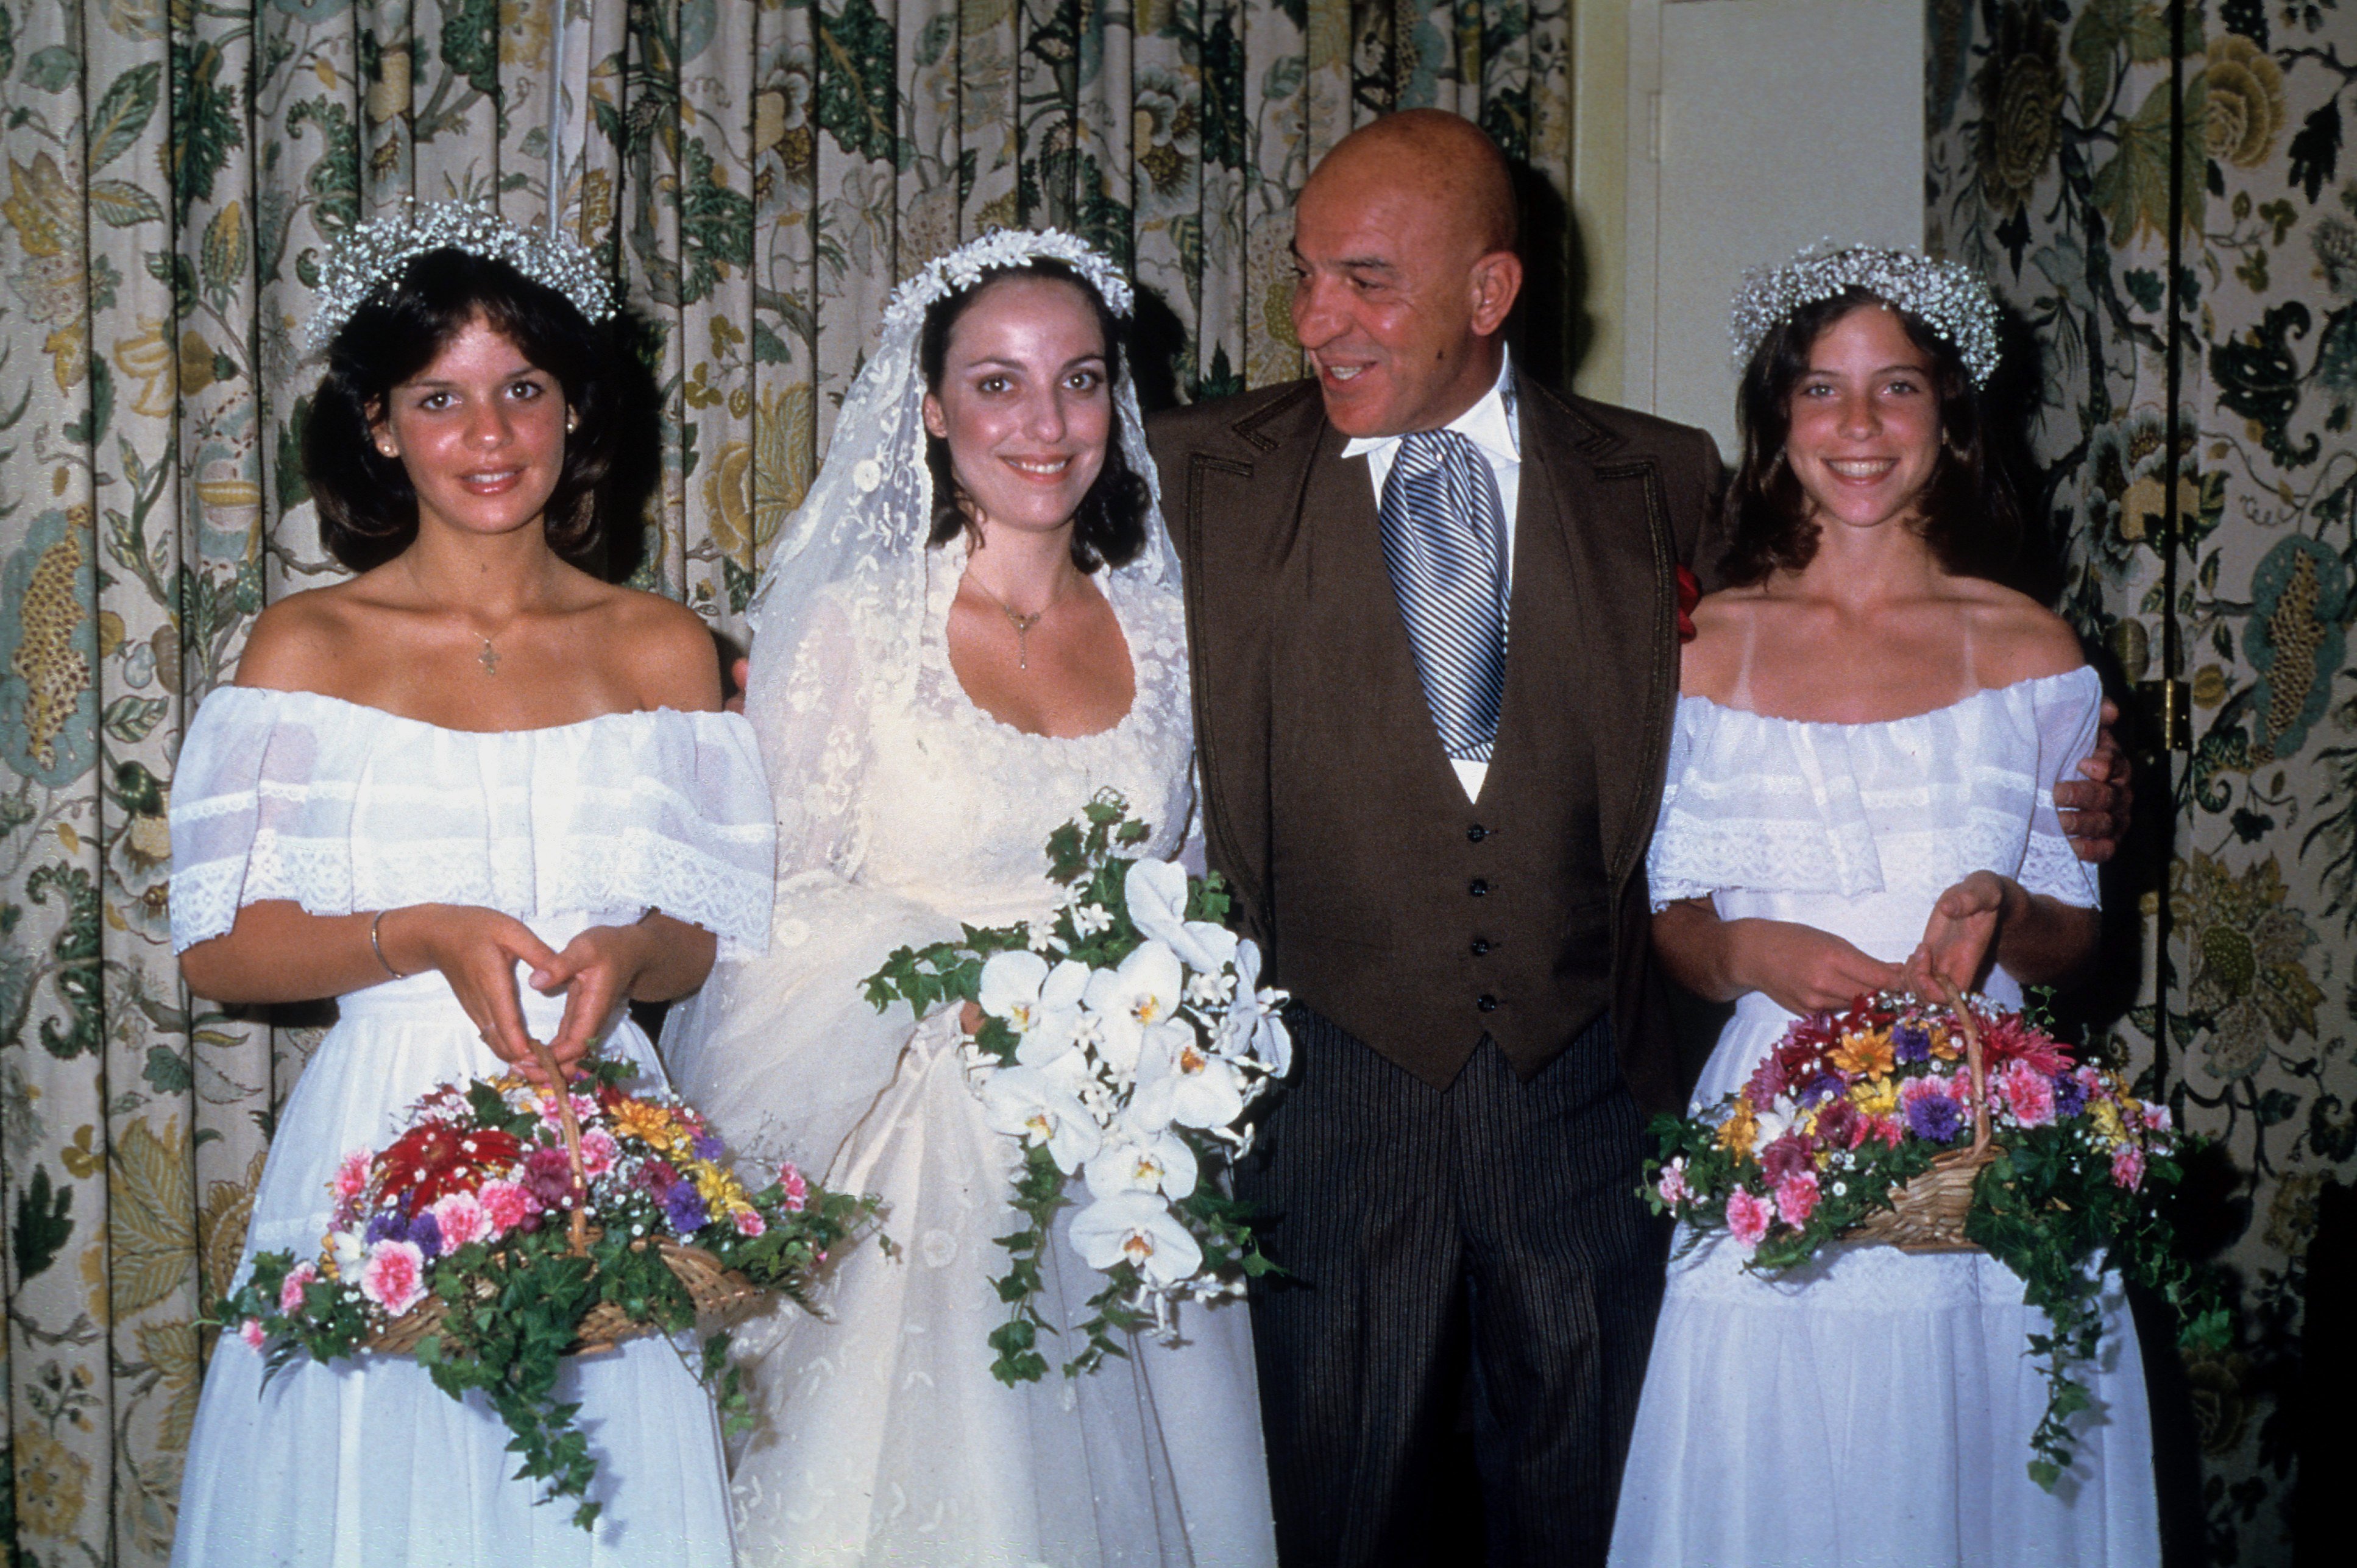 Actor Telly Savalas and his daughters pose for a portrait at Daughter Christina's Wedding 1991 in Los Angeles, California. | Source: Getty Images